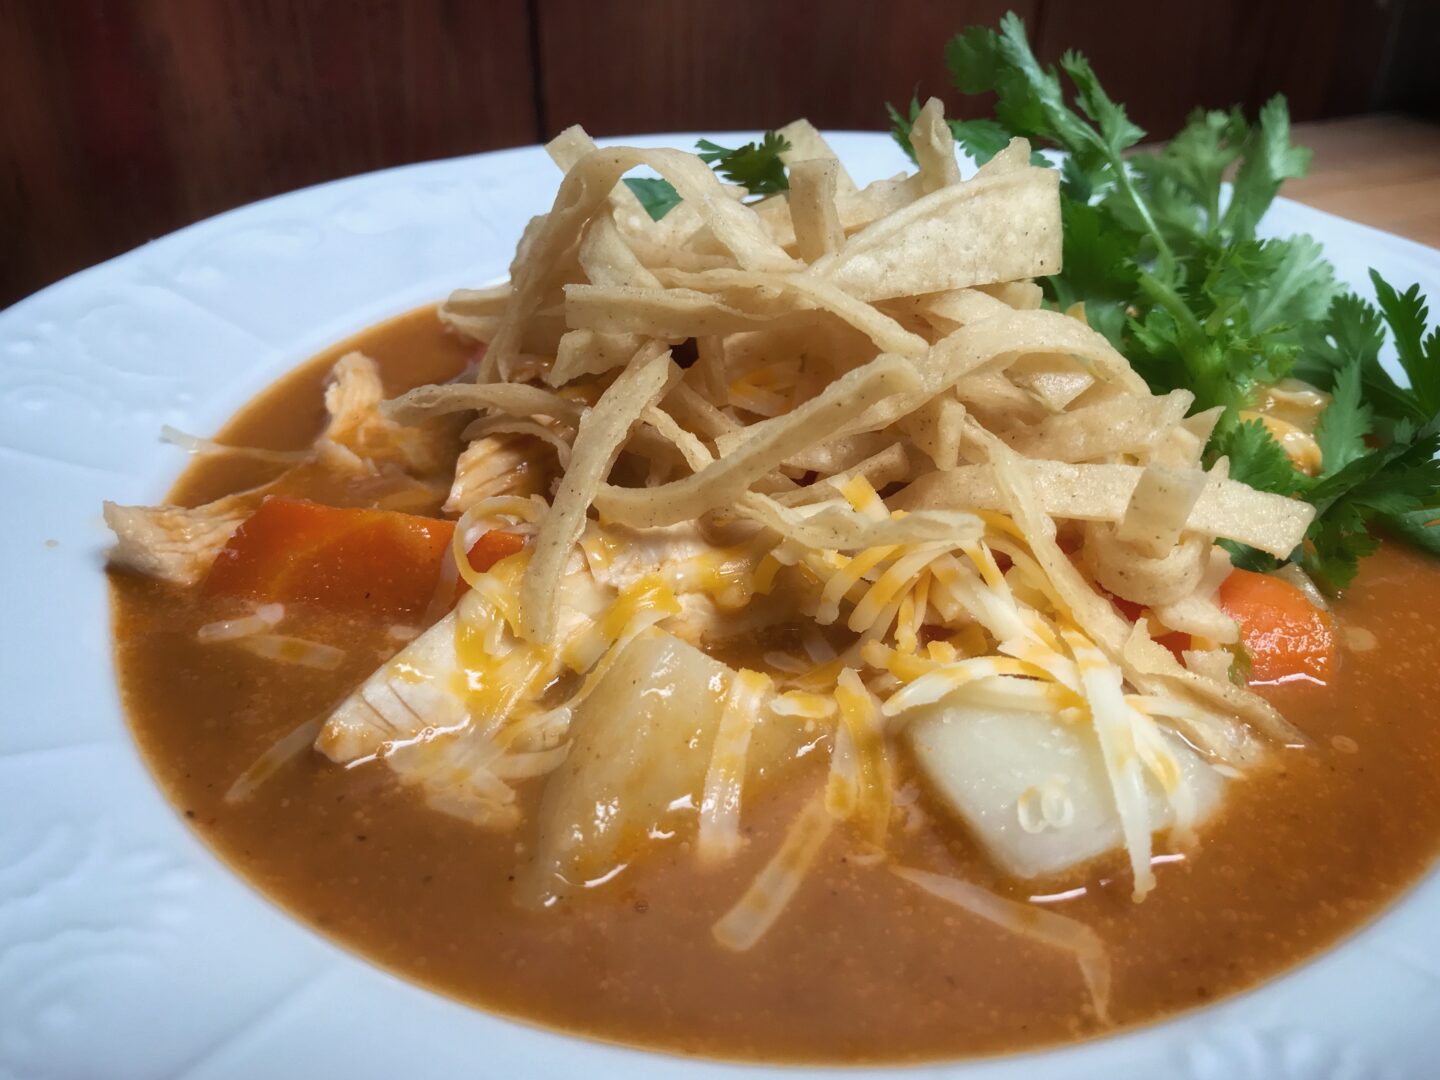 A white plate with a bowl of soup and tortillas.